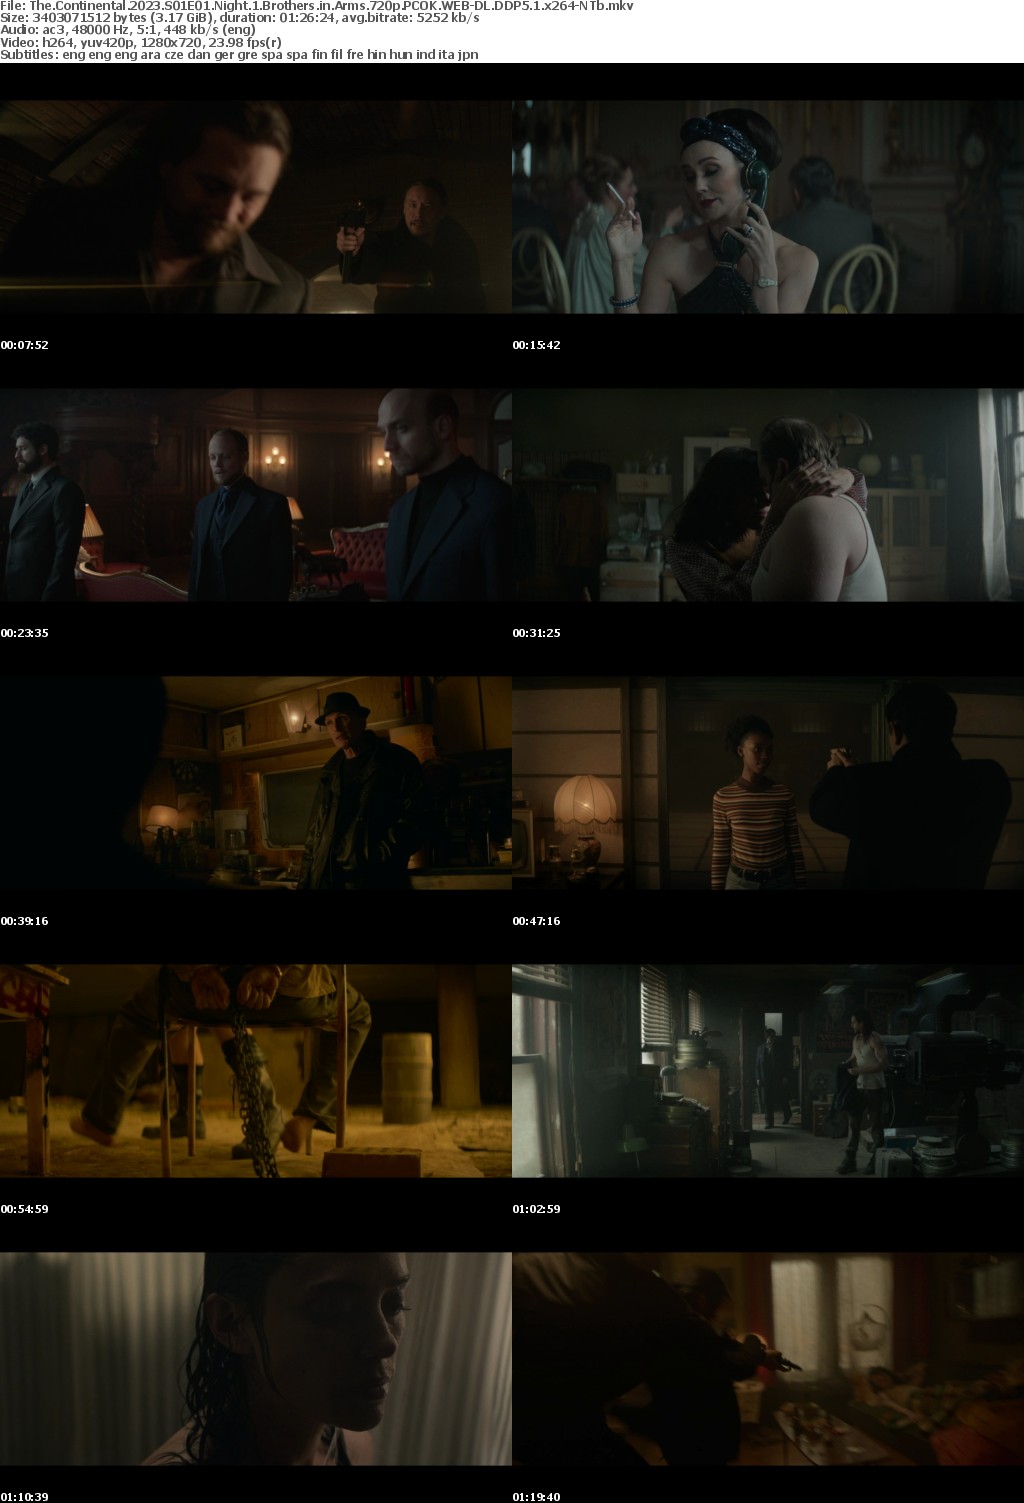 The Continental 2023 S01E01 Night 1 Brothers in Arms 720p PCOK WEB-DL DDP5 1 x264-NTb